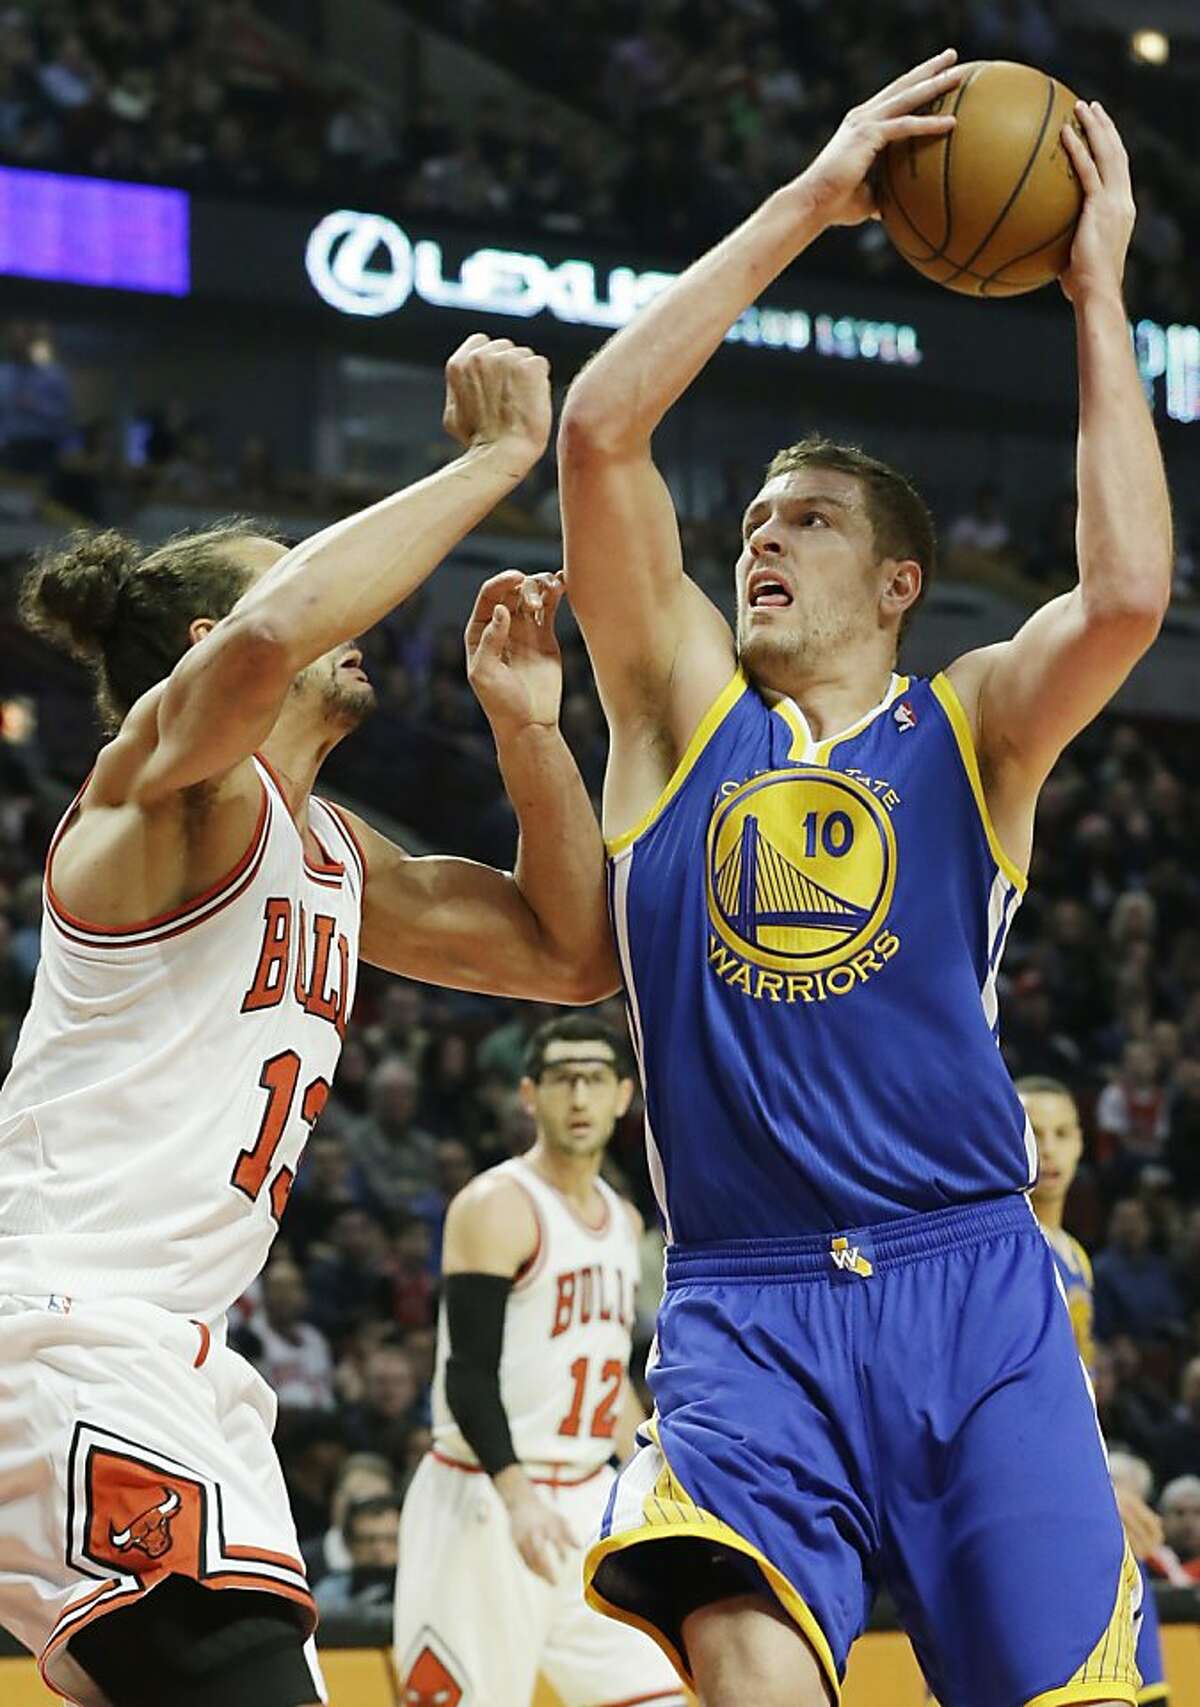 Golden State Warriors forward David Lee, right, looks to the basket against Chicago Bulls center Joakim Noah during the first half of an NBA basketball game in Chicago on Friday, Jan. 25, 2013. (AP Photo/Nam Y. Huh)